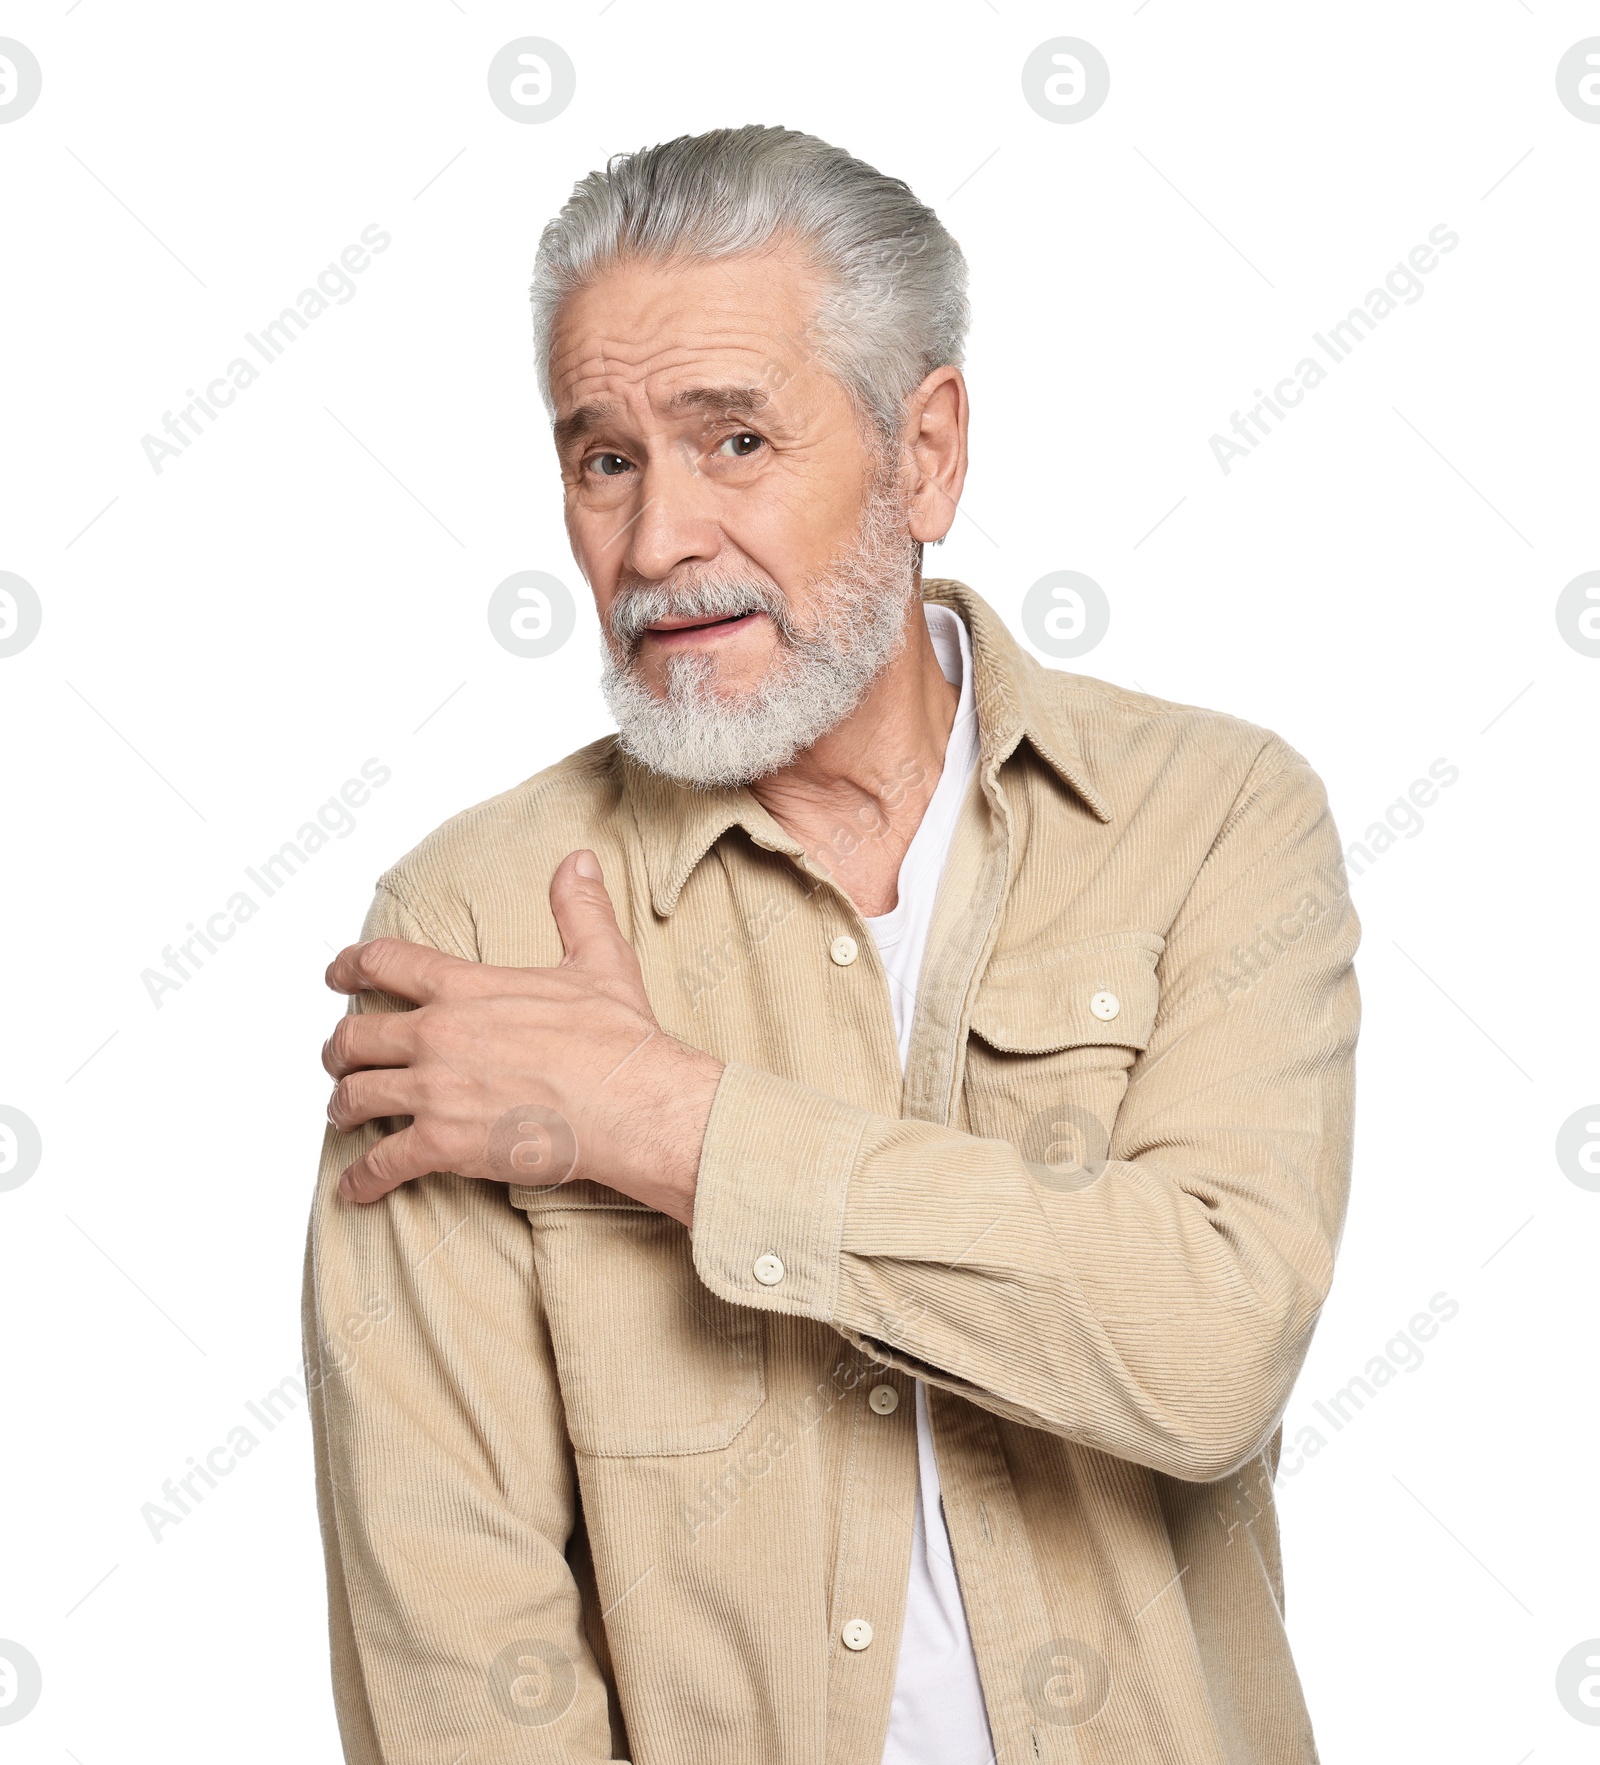 Photo of Arthritis symptoms. Man suffering from pain in shoulder on white background